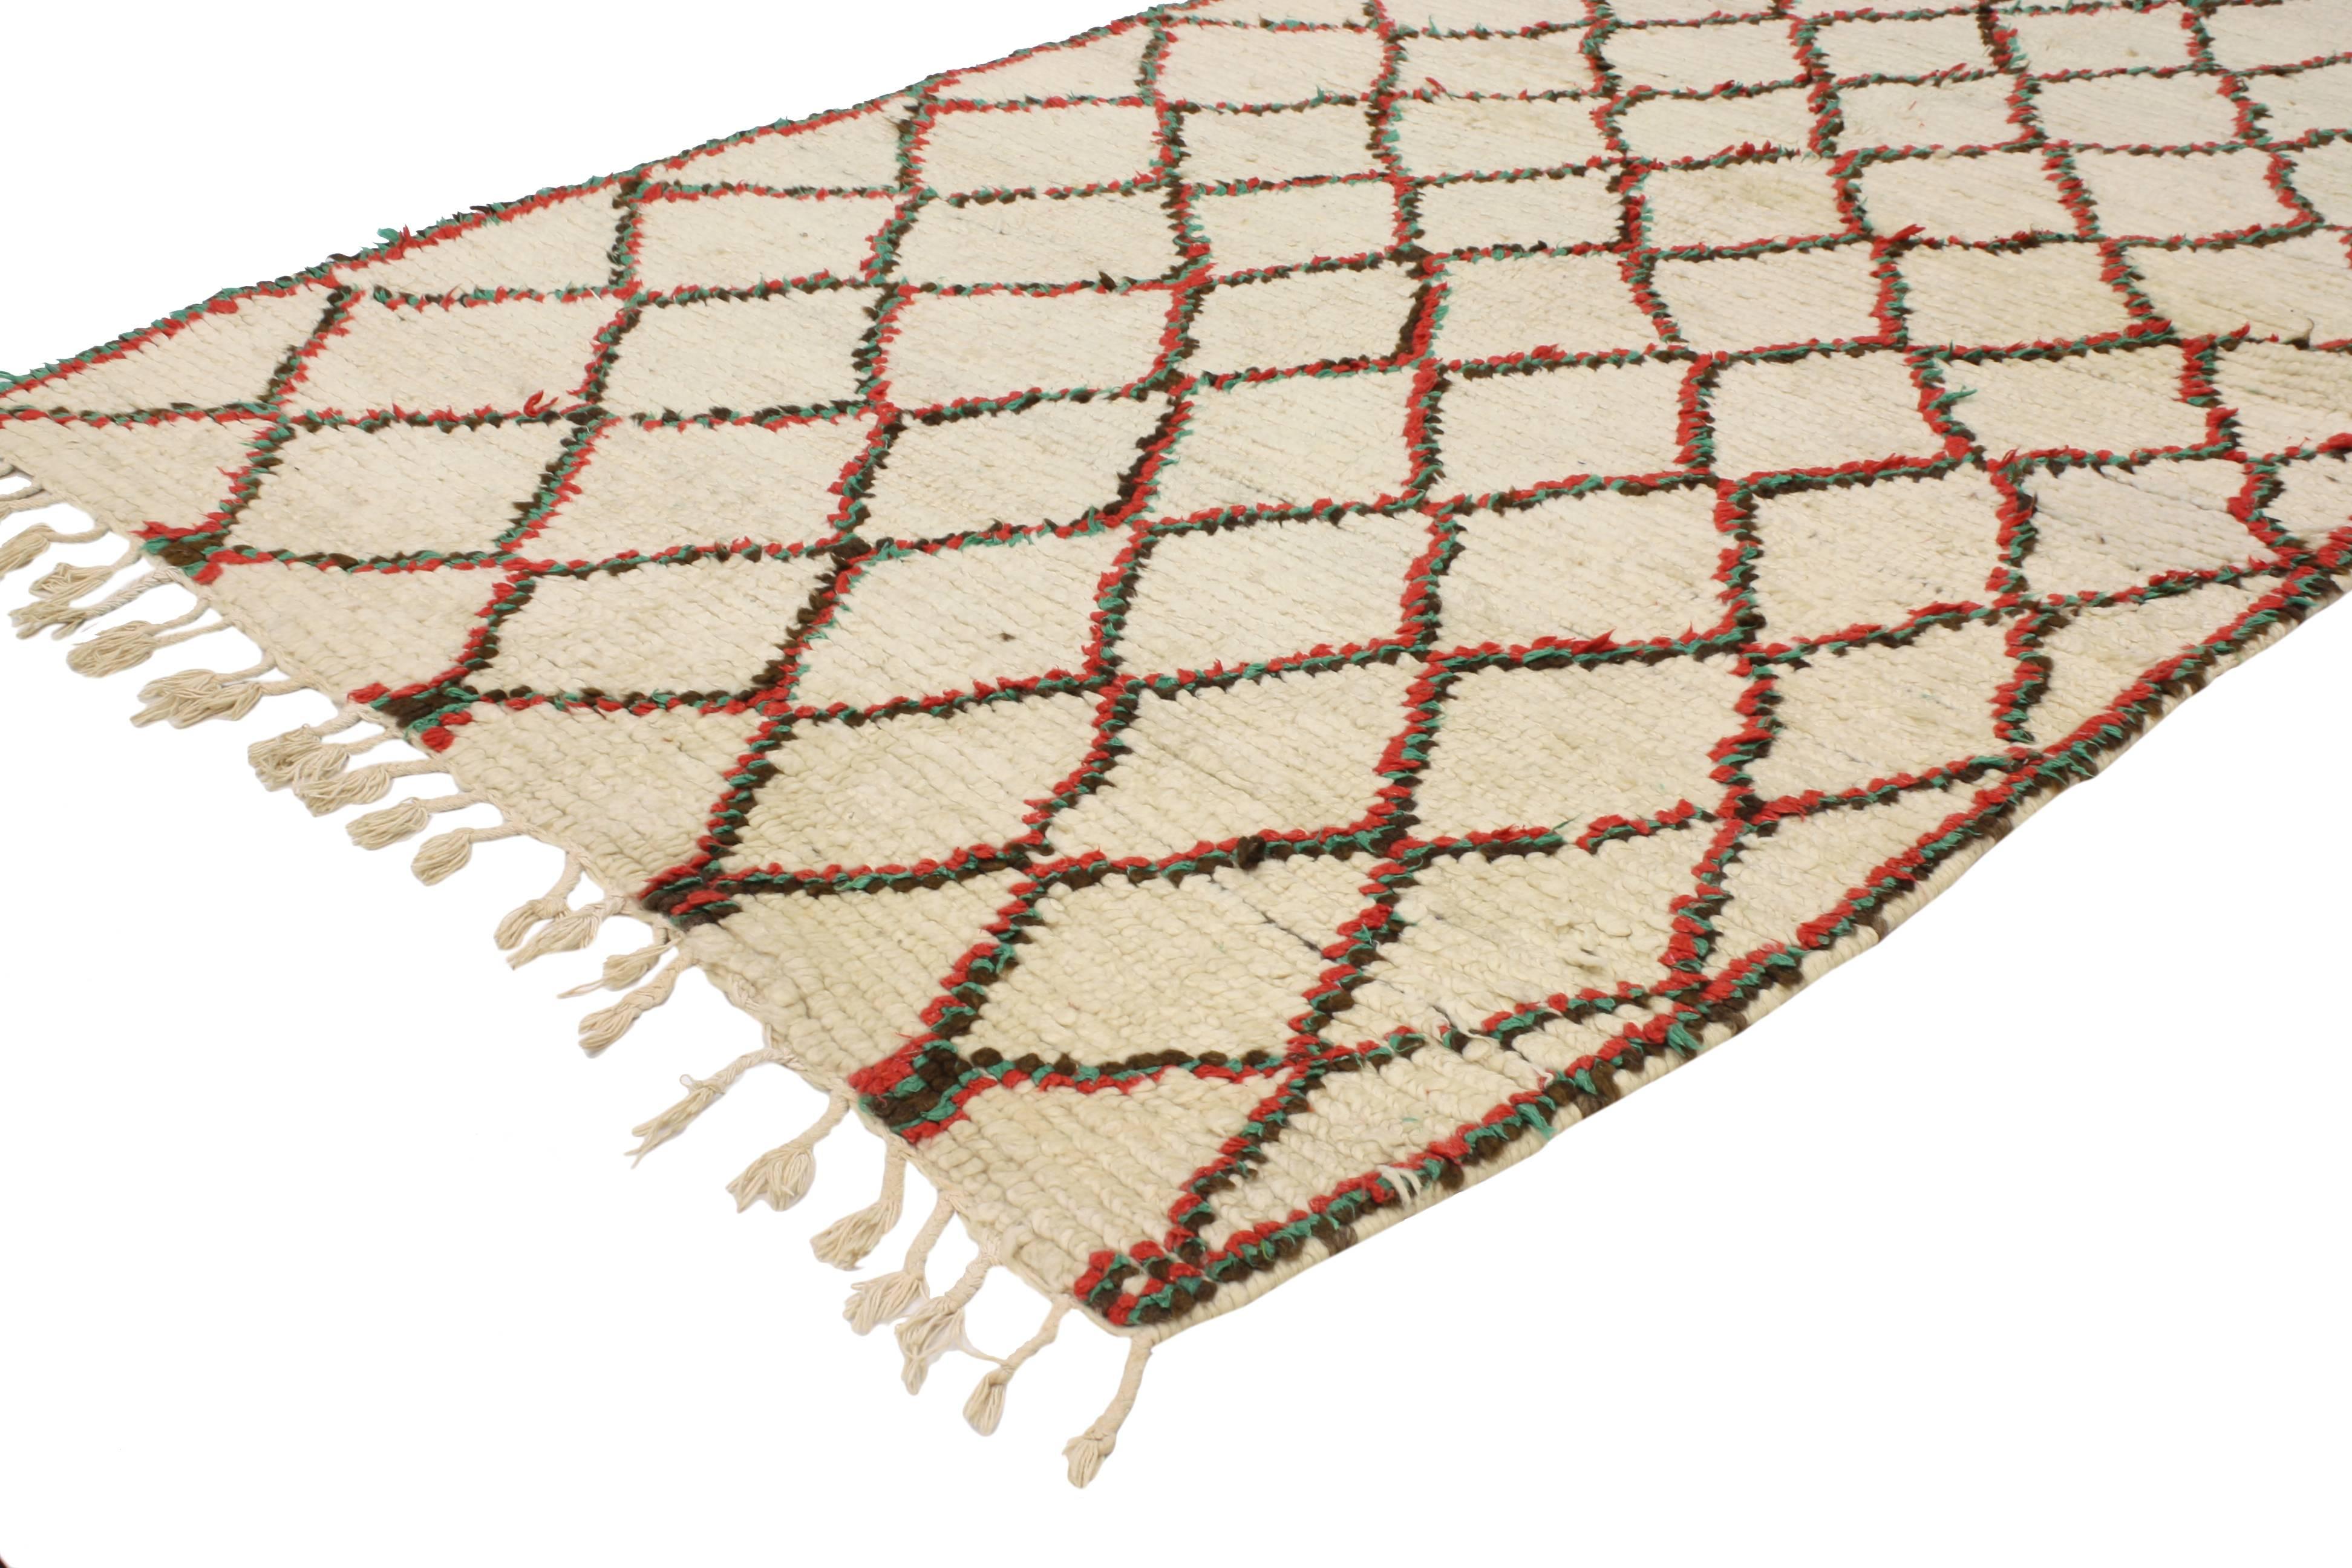 20452 Vintage Berber Moroccan Azilal Rug with Hygge Vibes. Concerted efforts run deep in this impeccably woven vintage Berber Moroccan Azilal rug. This hand-knotted wool vintage Berber Moroccan Azilal rug features a simplistic style with a lattice